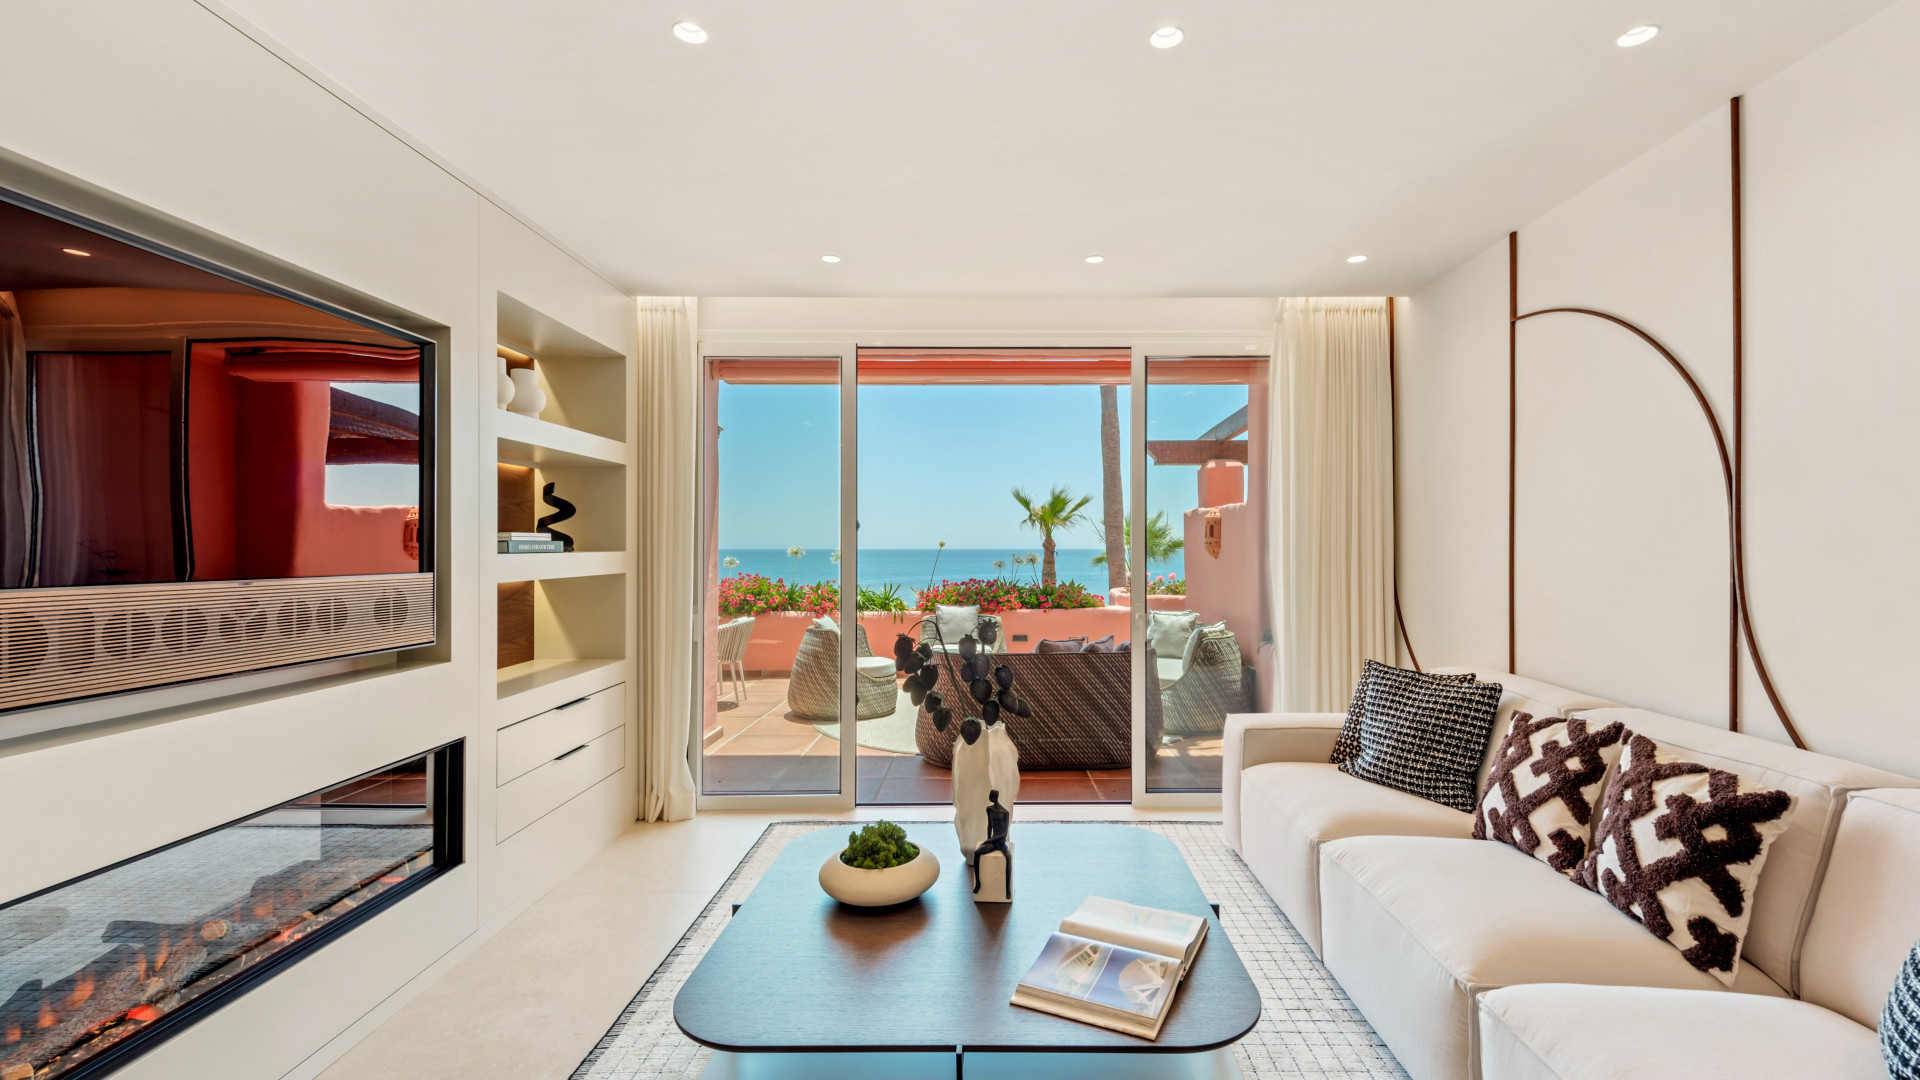 Recently refurbished frontline beach apartment with impressive open views of the Mediterranean